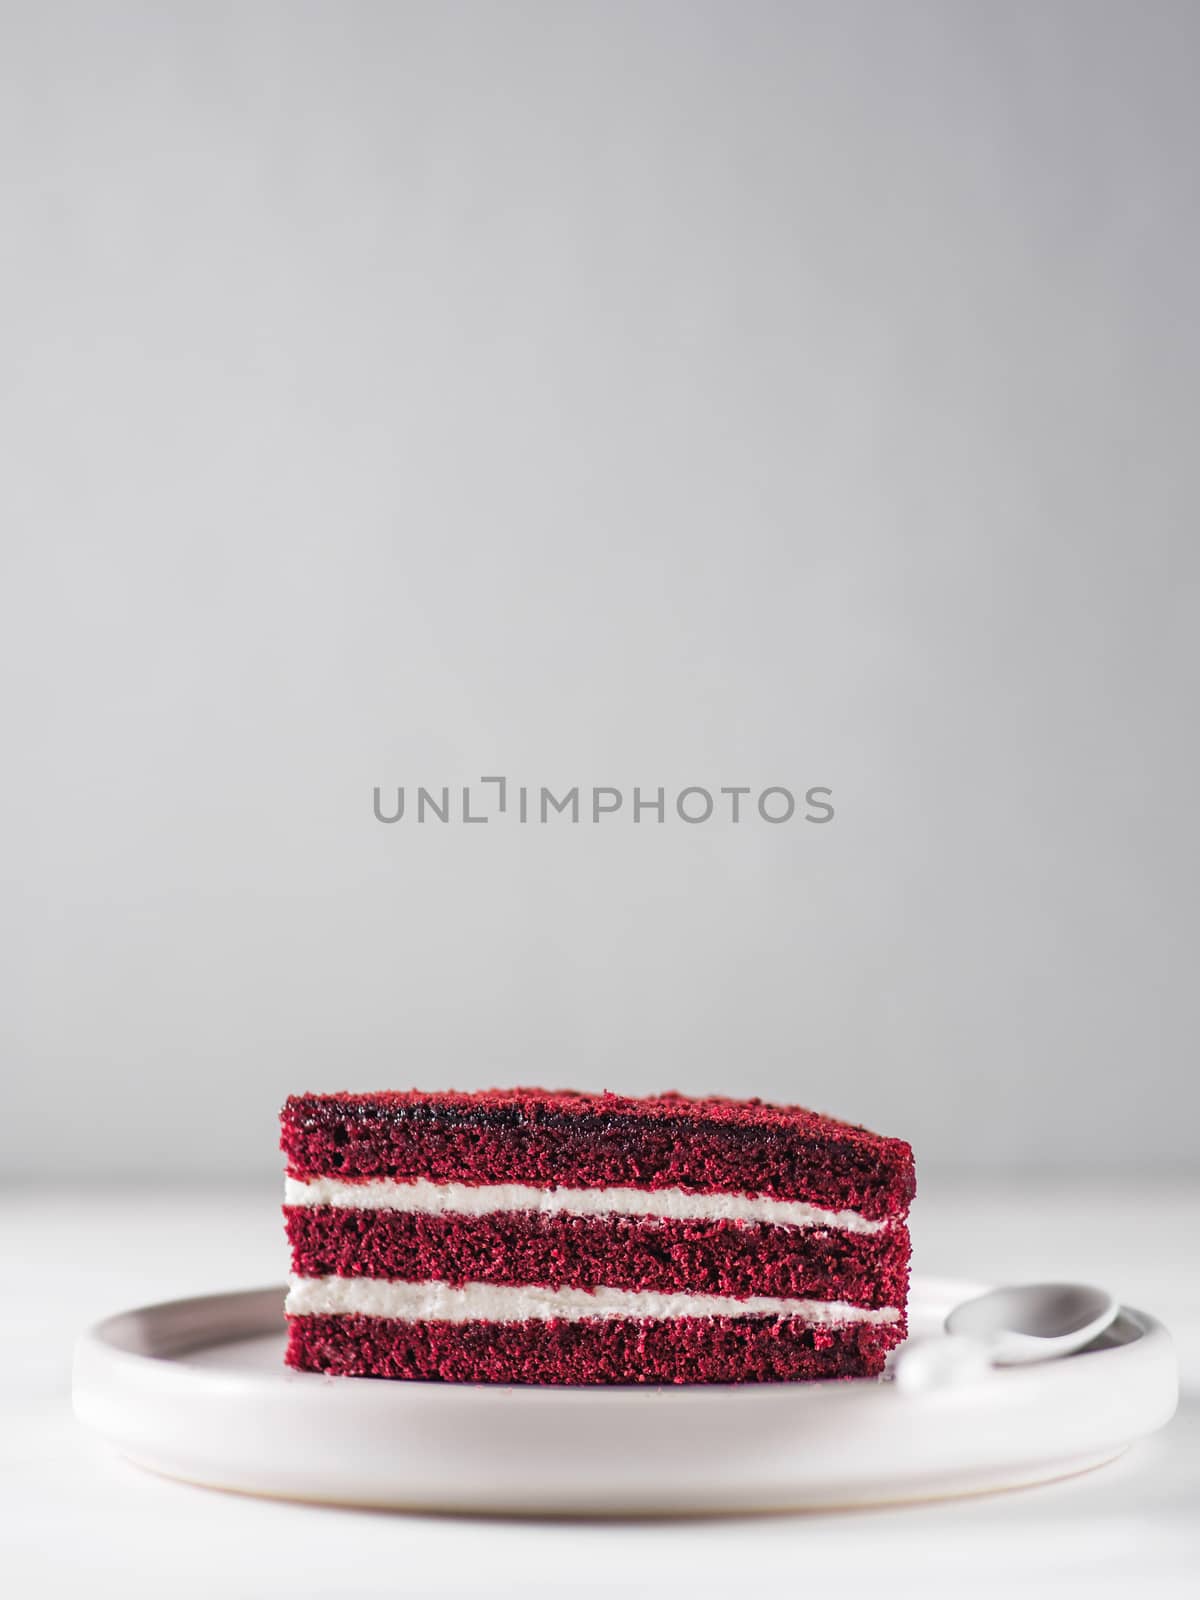 Piece of red velvet cake with perfect texture in matte plate on white marble tabletop. Slice of delicious homemade red velvet cake with raspberry and chocolate. Copy space for text.